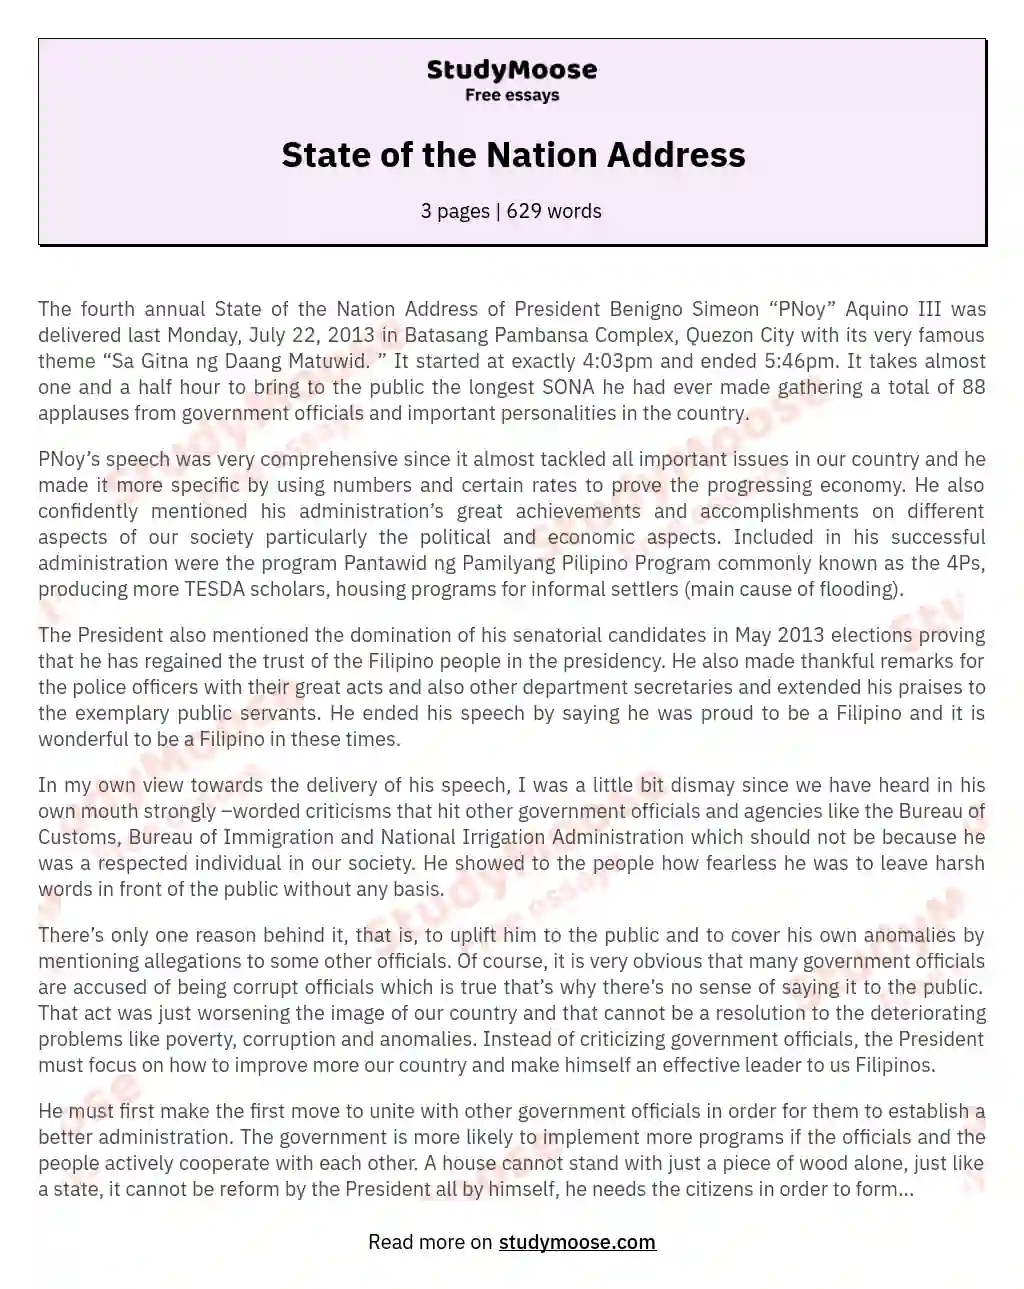 State of the Nation Address essay